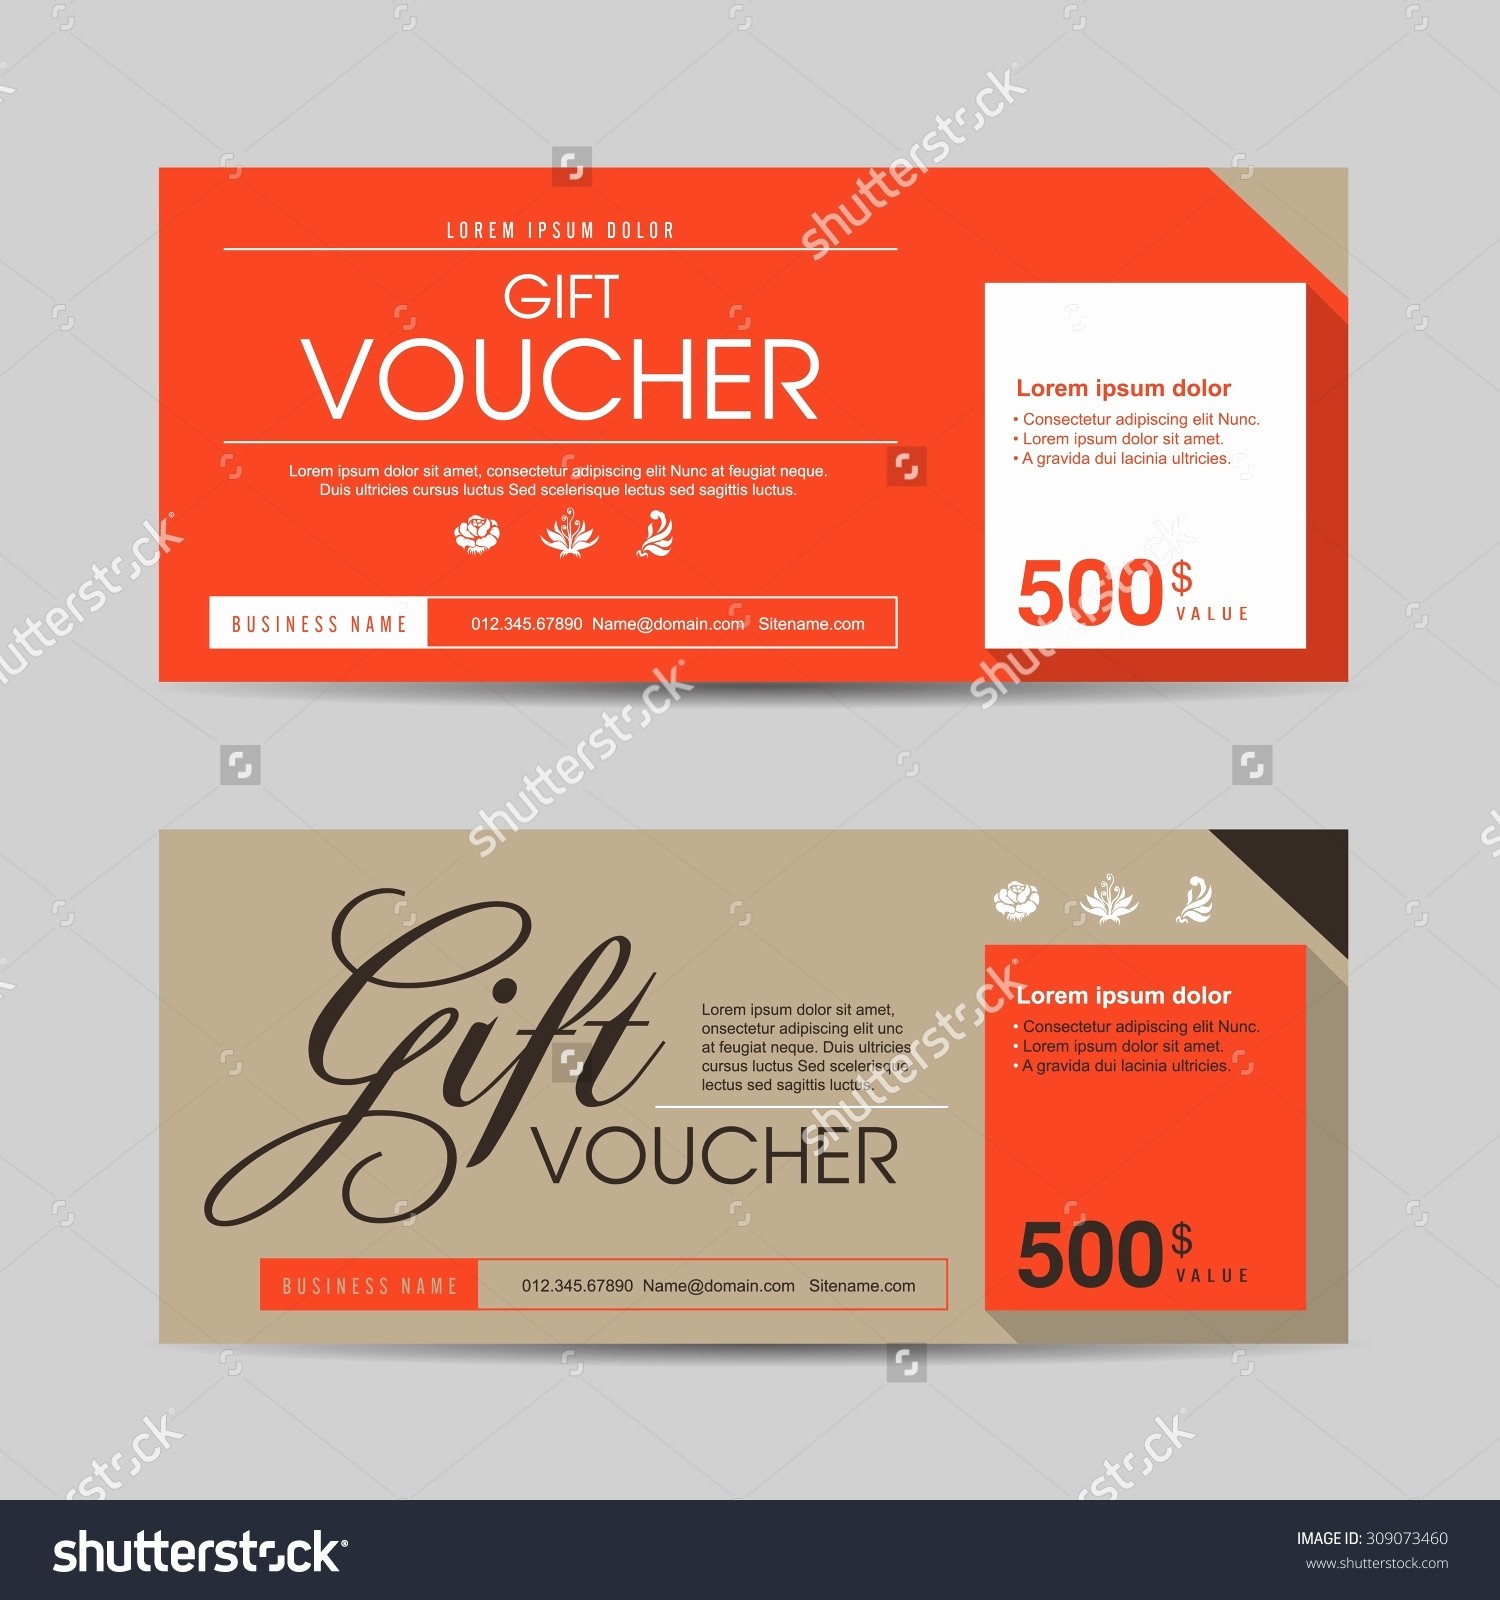 50 Luxury Auto Detailing Gift Certificate Template DOCUMENTS IDEAS Document